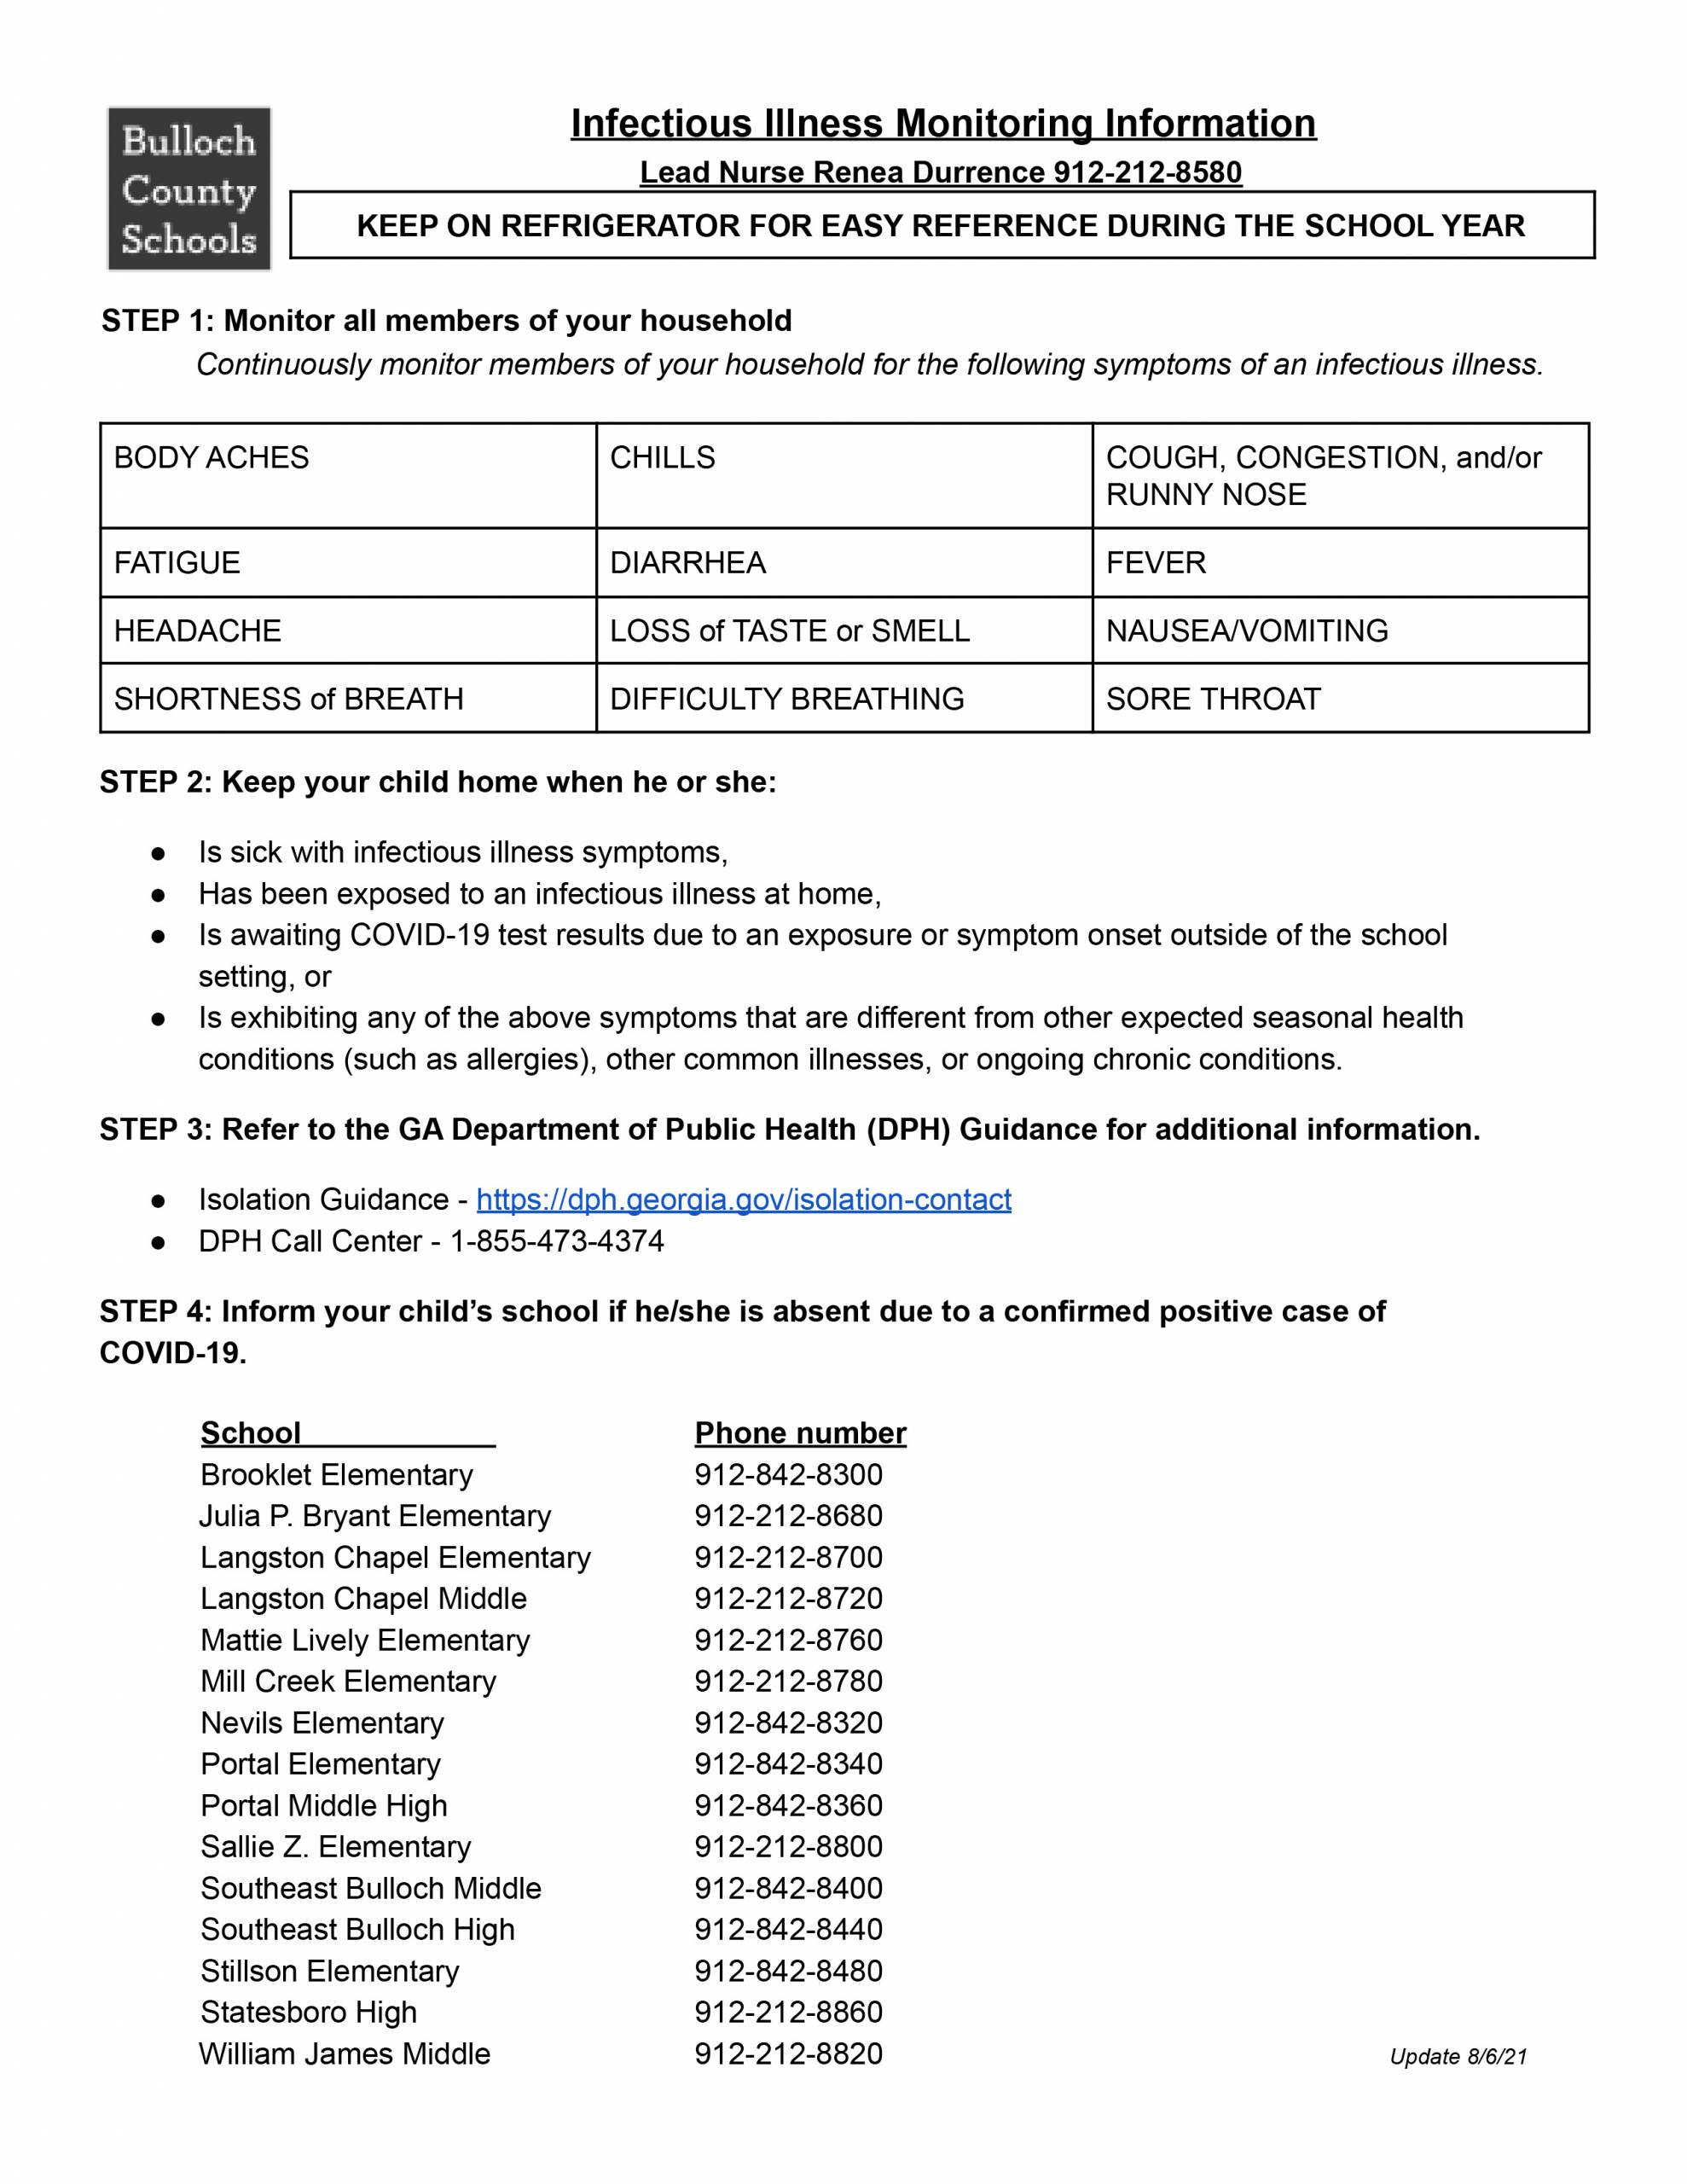 Infectious Illness Monitoring form